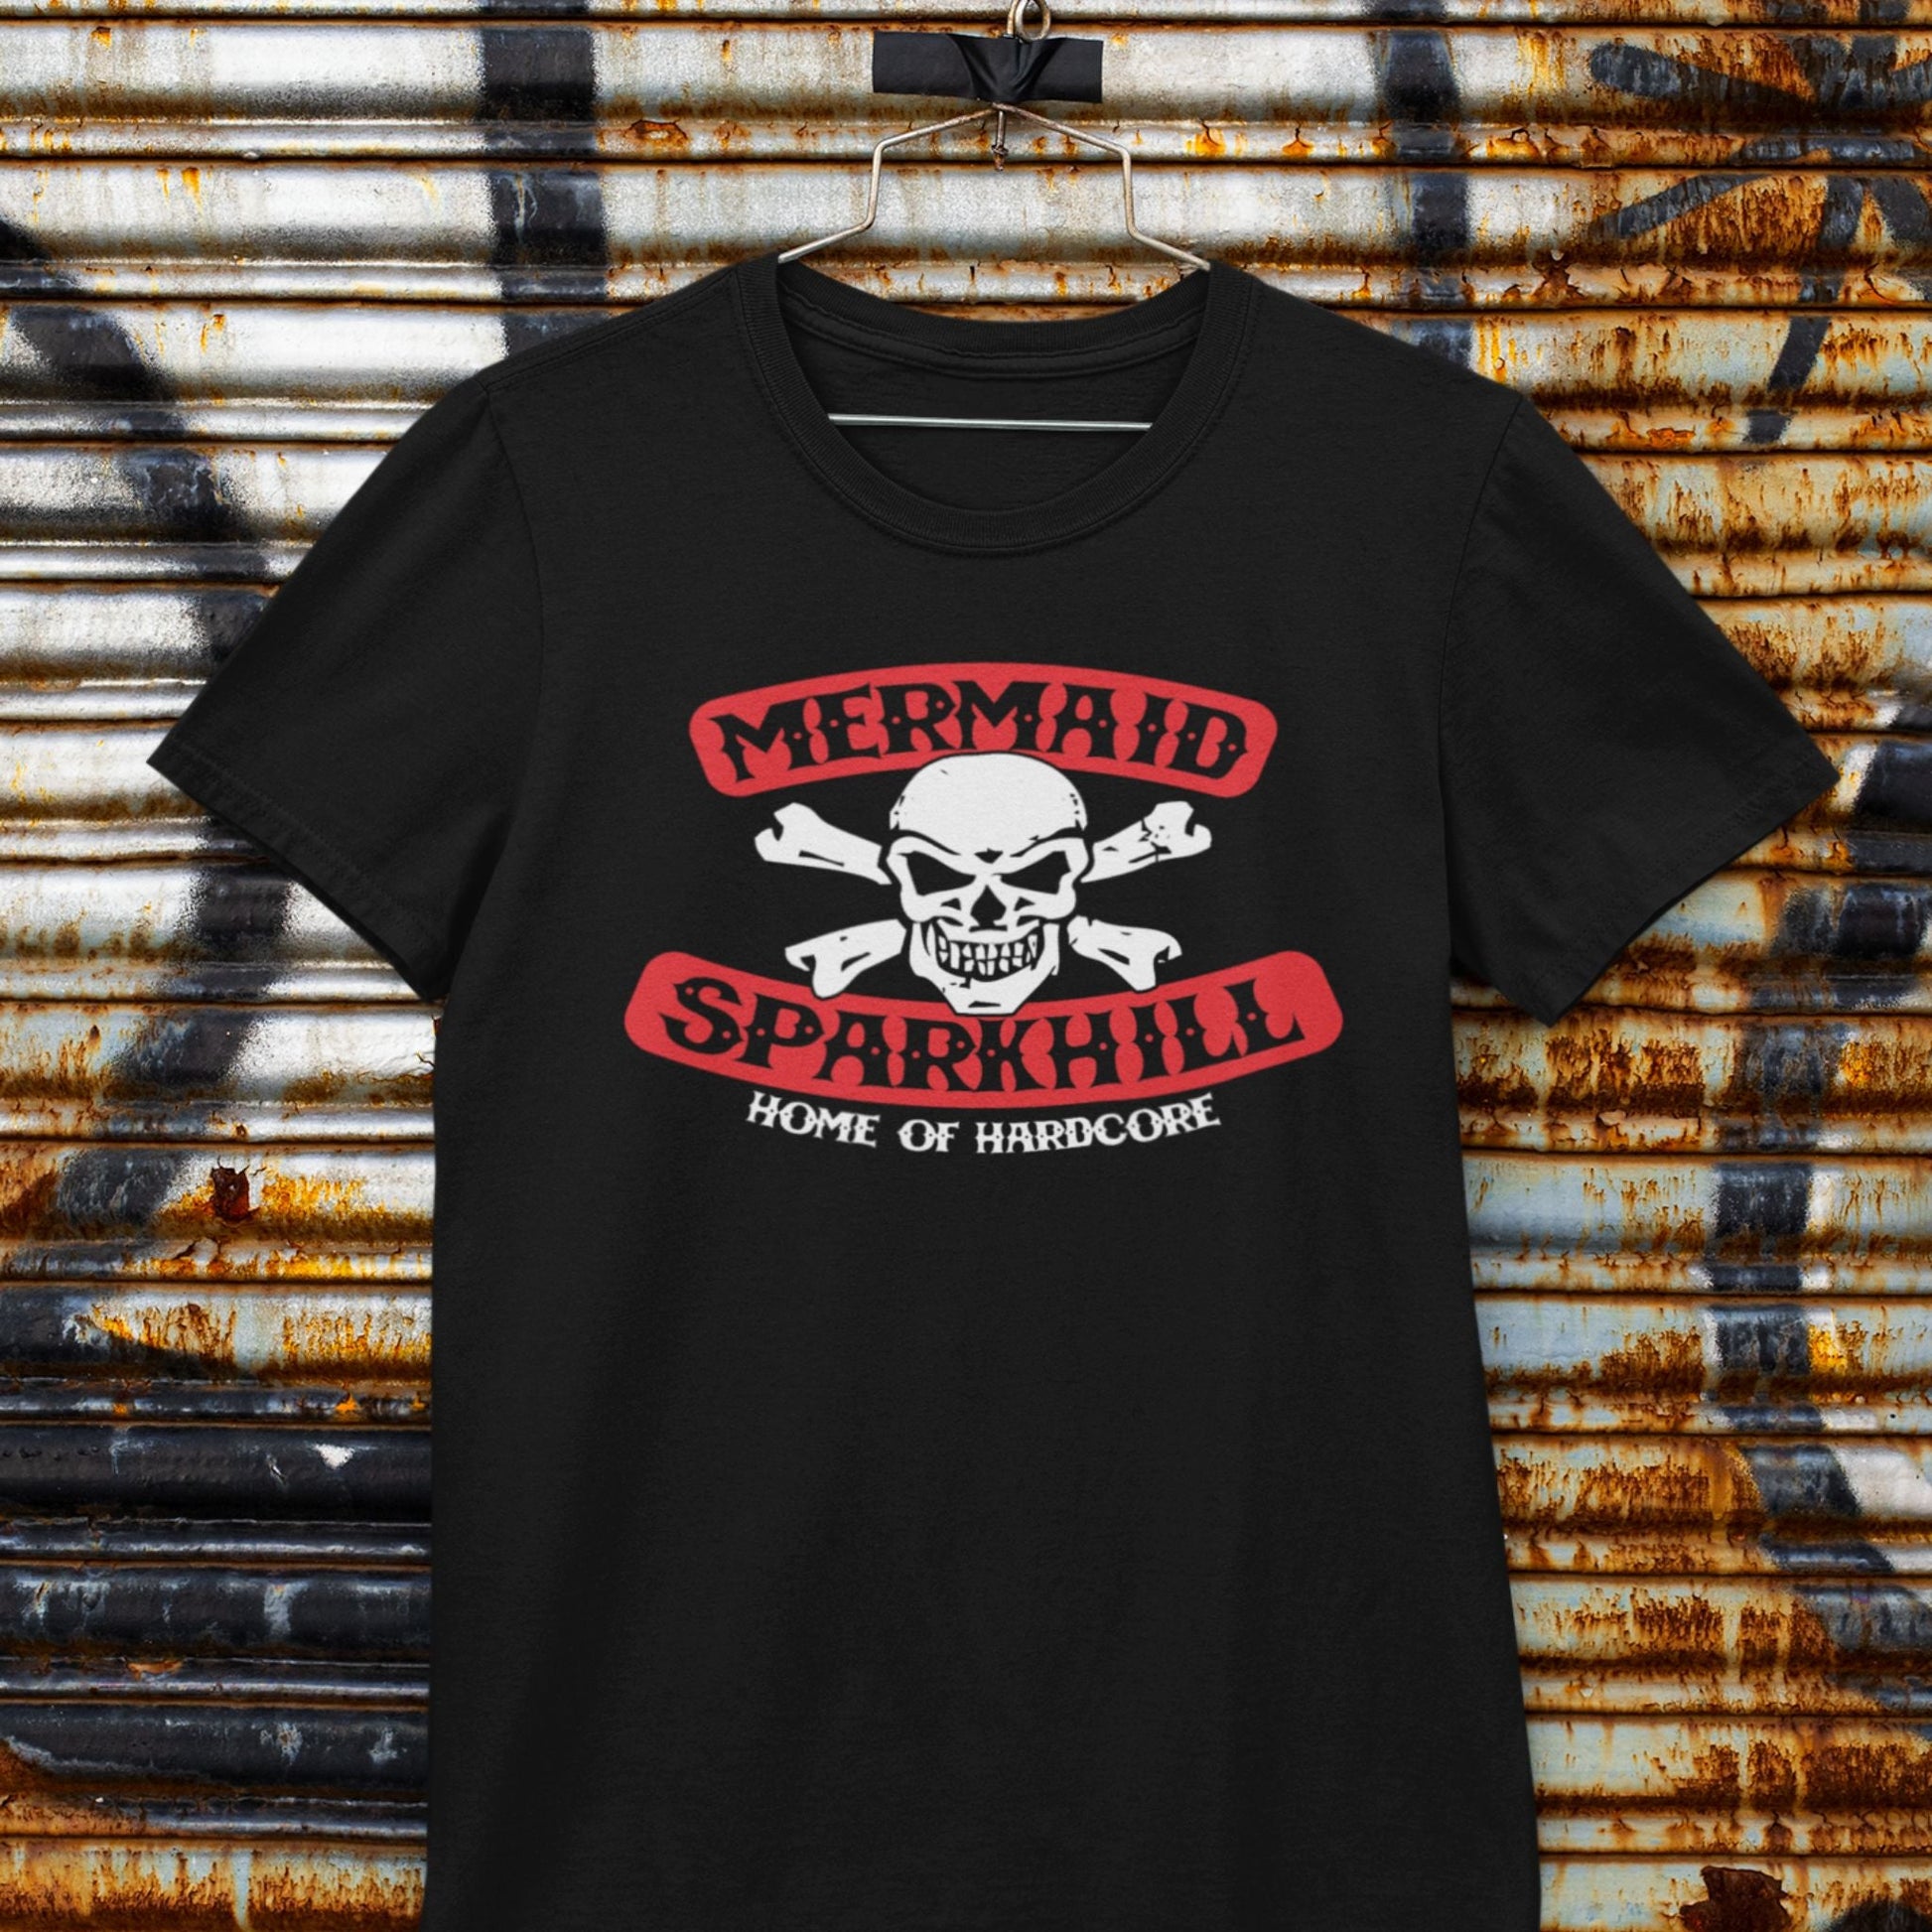 Mermaid T-shirt - Dirty Stop Outs